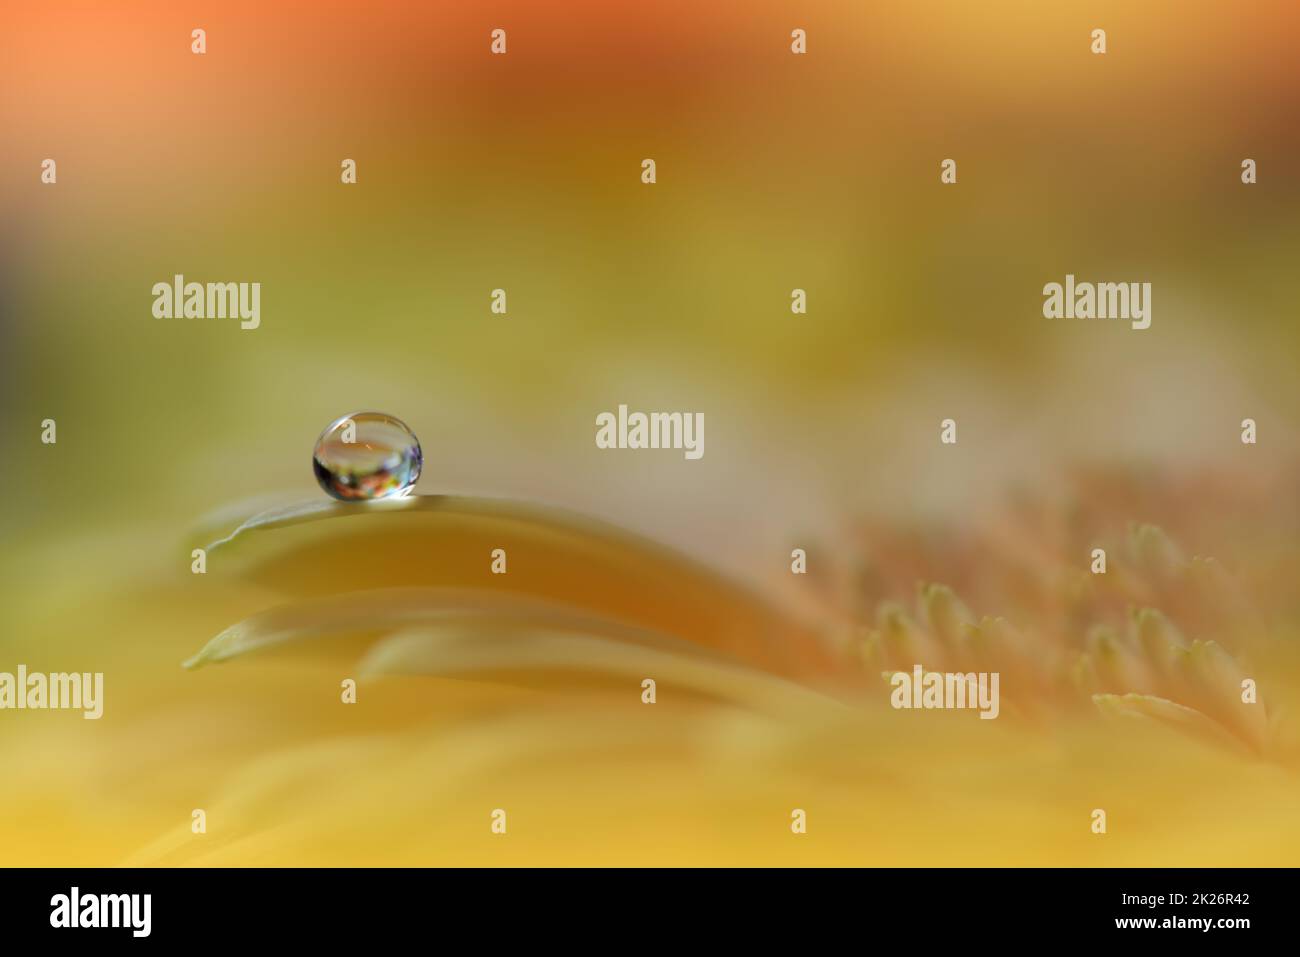 Bella Macro Photo.Dream Flowers.Border Art Design.Magic Light.Close up Photography.Conceptual Abstract Image.Yellow and Orange background.Fantasy Floral Art.Creative Wallpaper.Beautiful Nature background.Amazing Spring Flower.Water Drop.Copy Space. Foto Stock